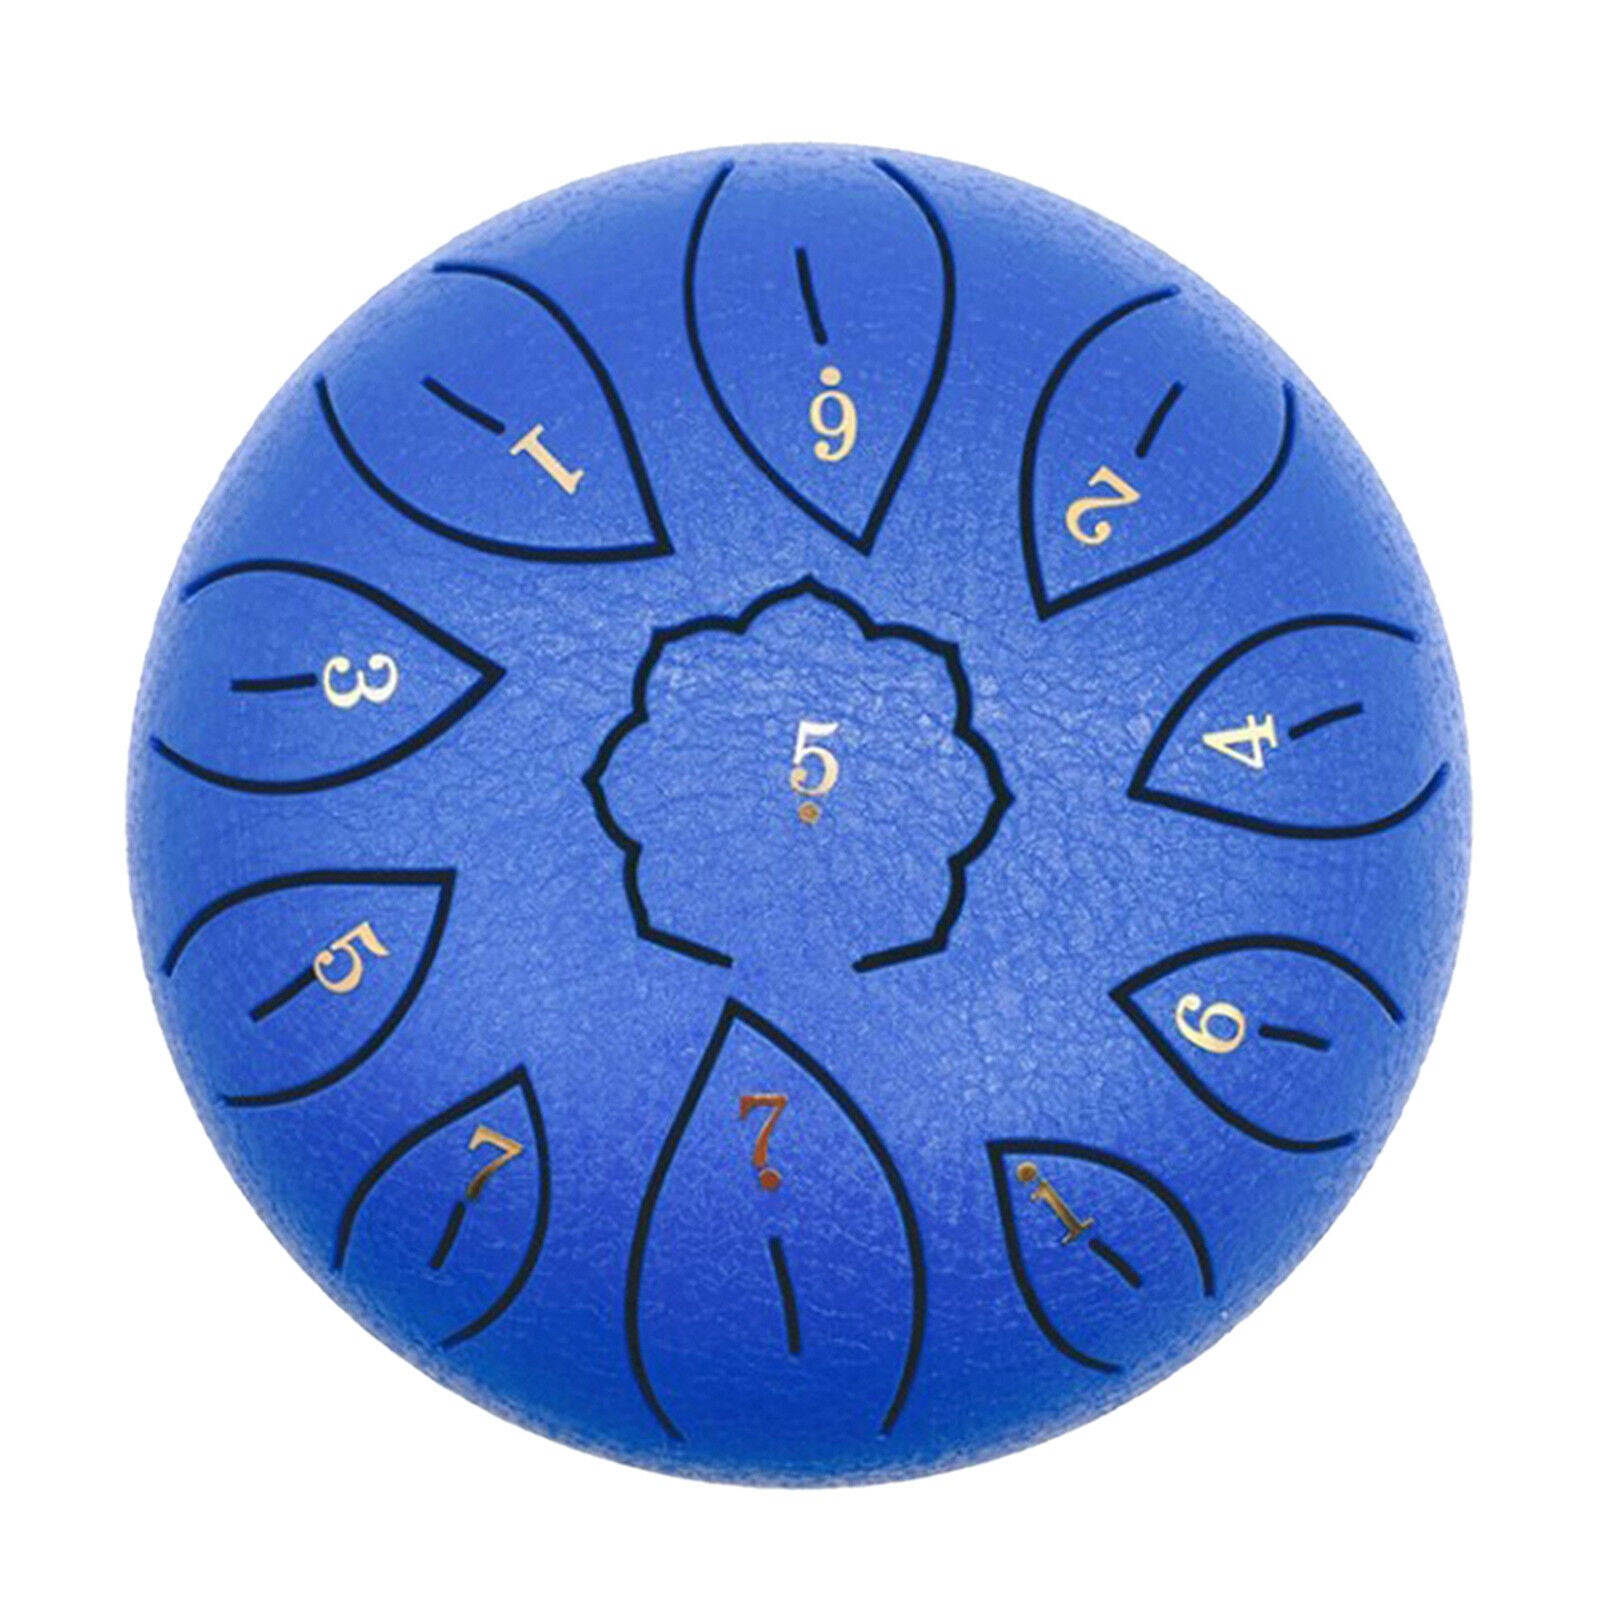 Steel Tongue Drum and Travel Bag Notes Stickers Gift for Adults Kids blue